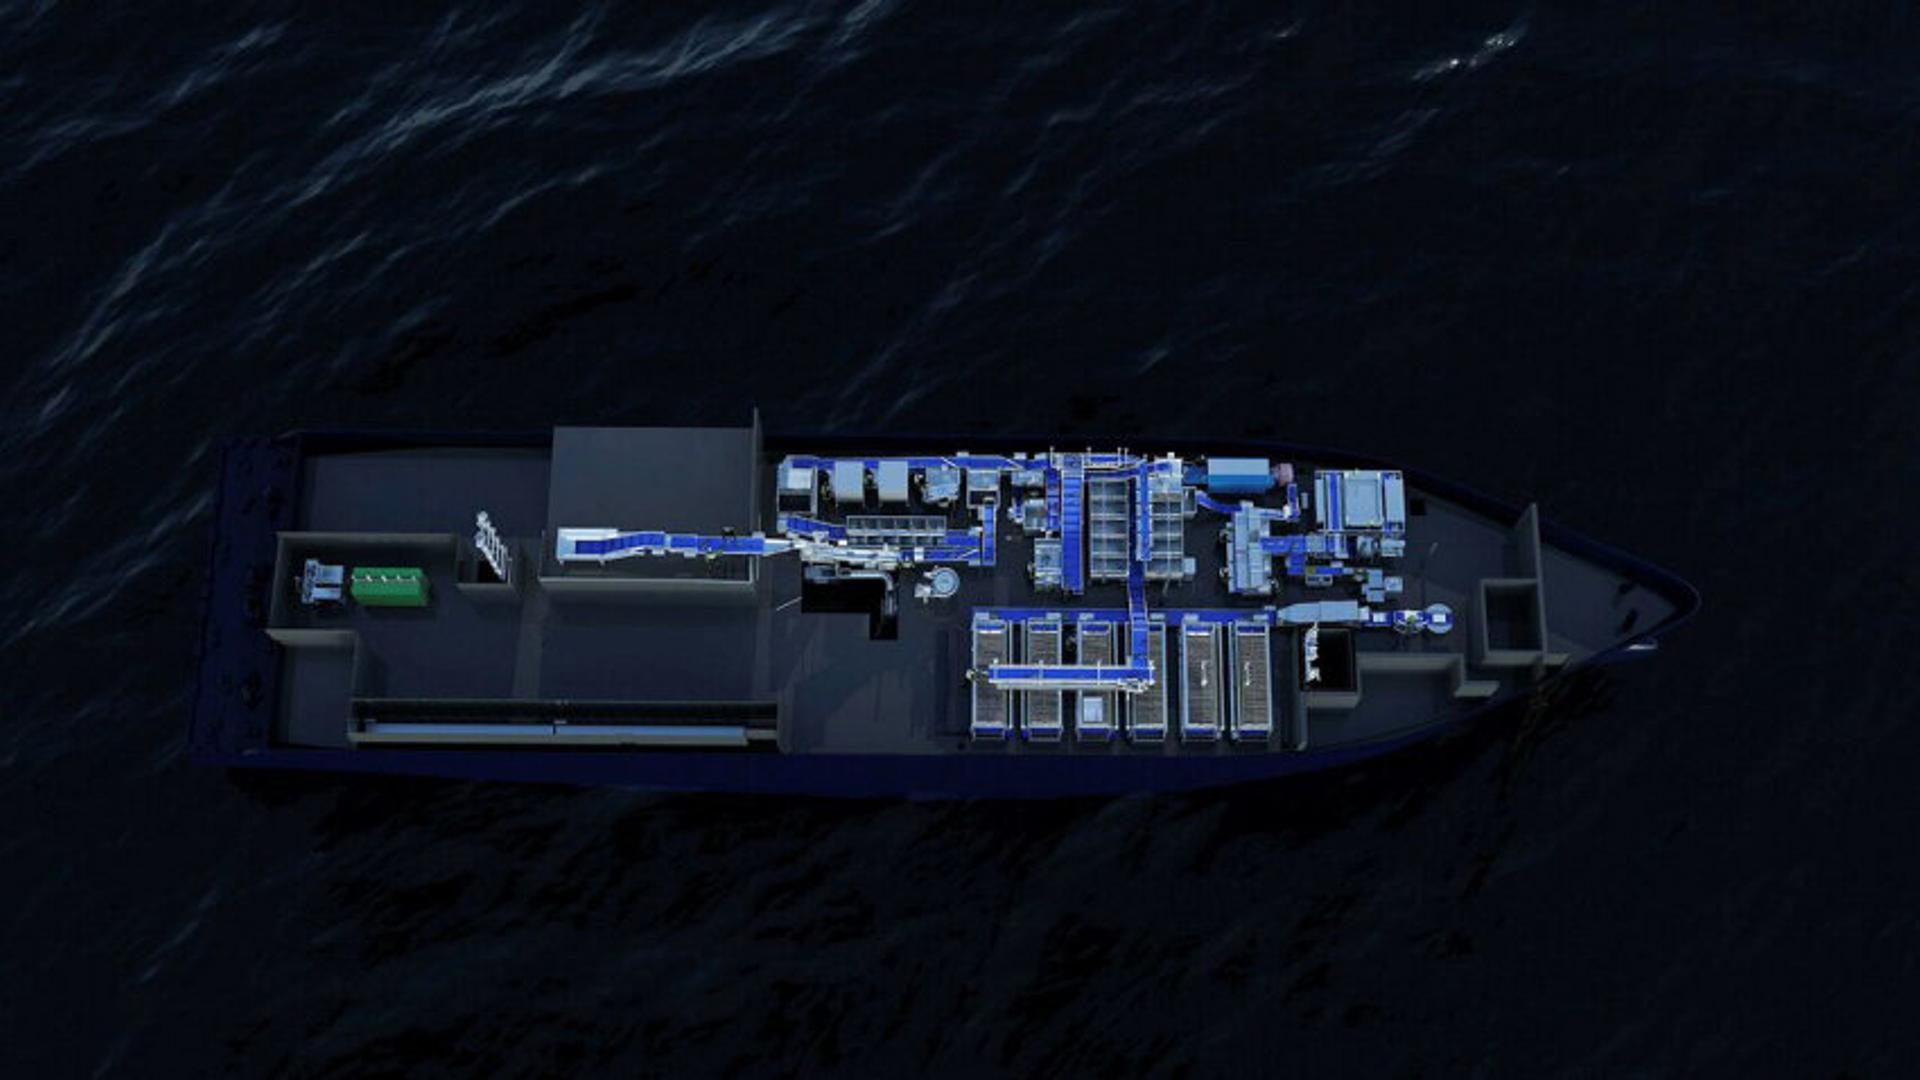 Digital model of ship from above